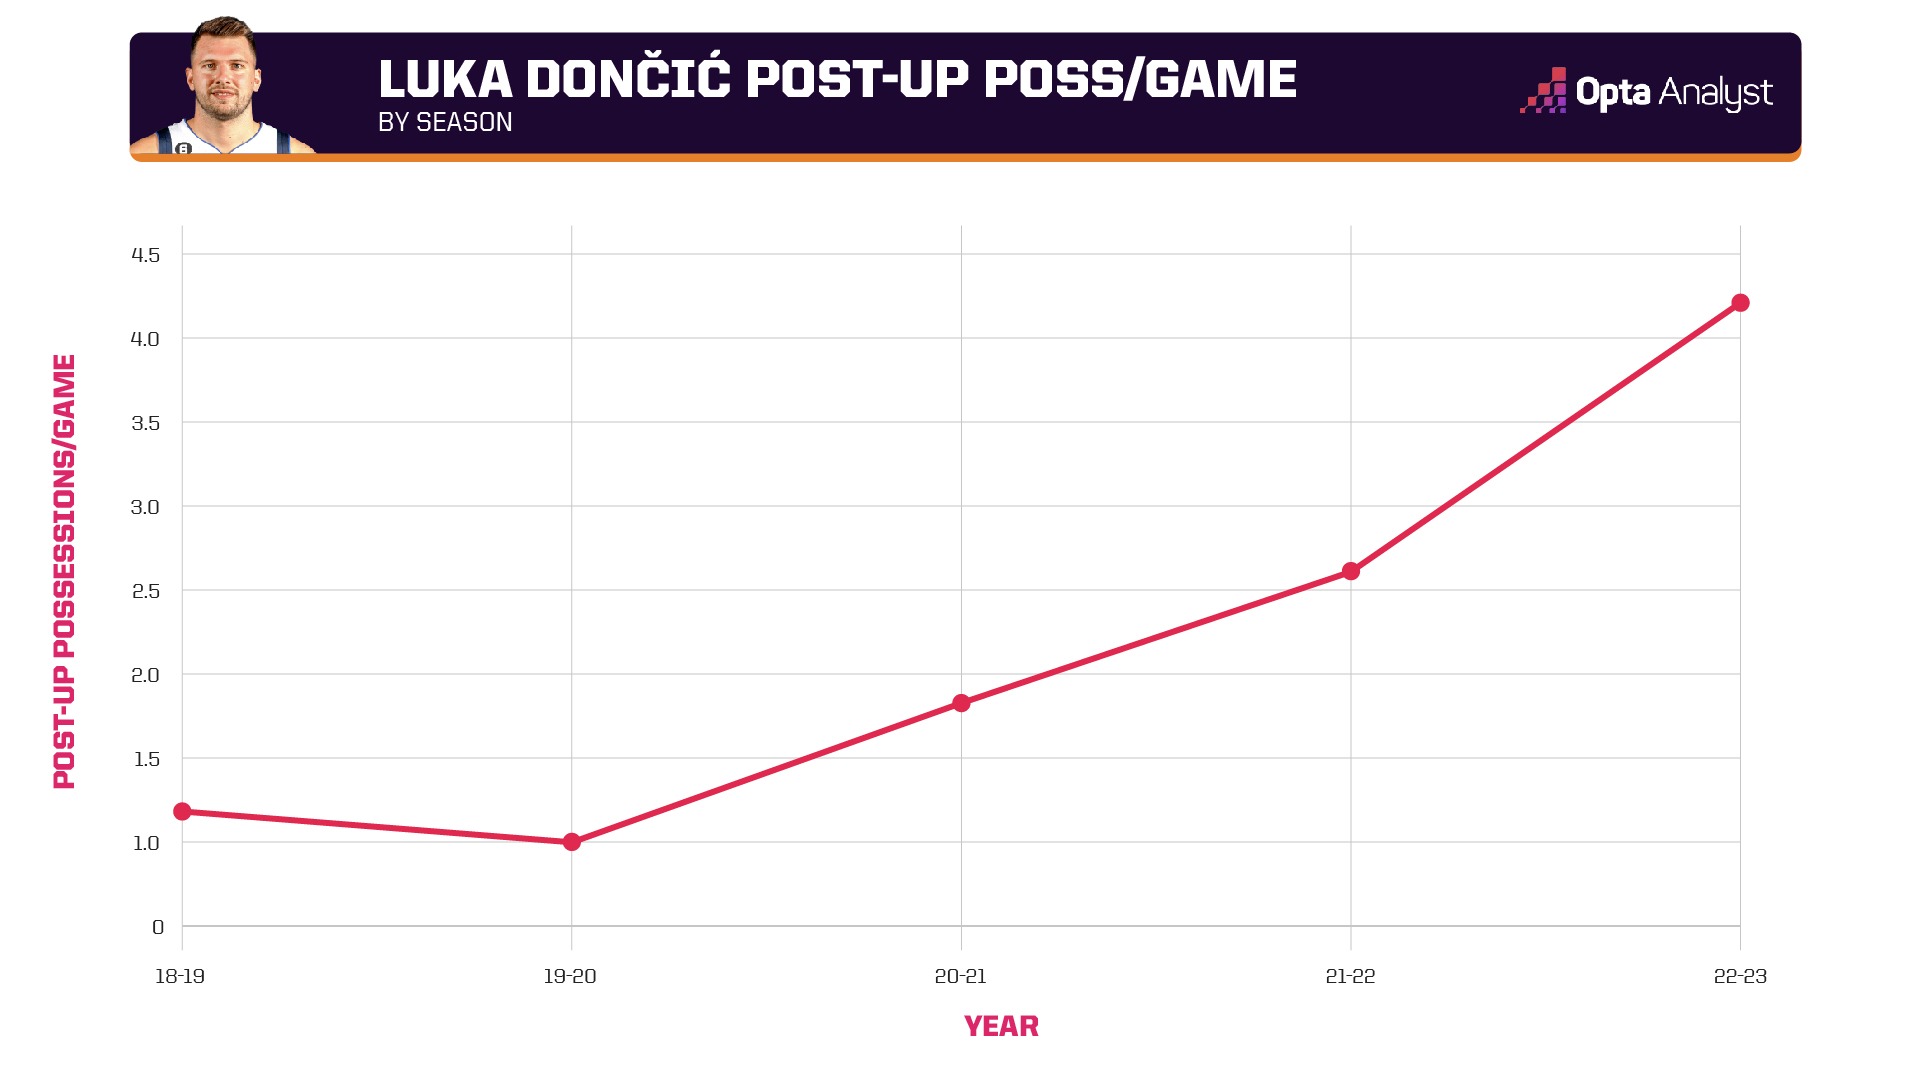 Luka post-up possessions per game